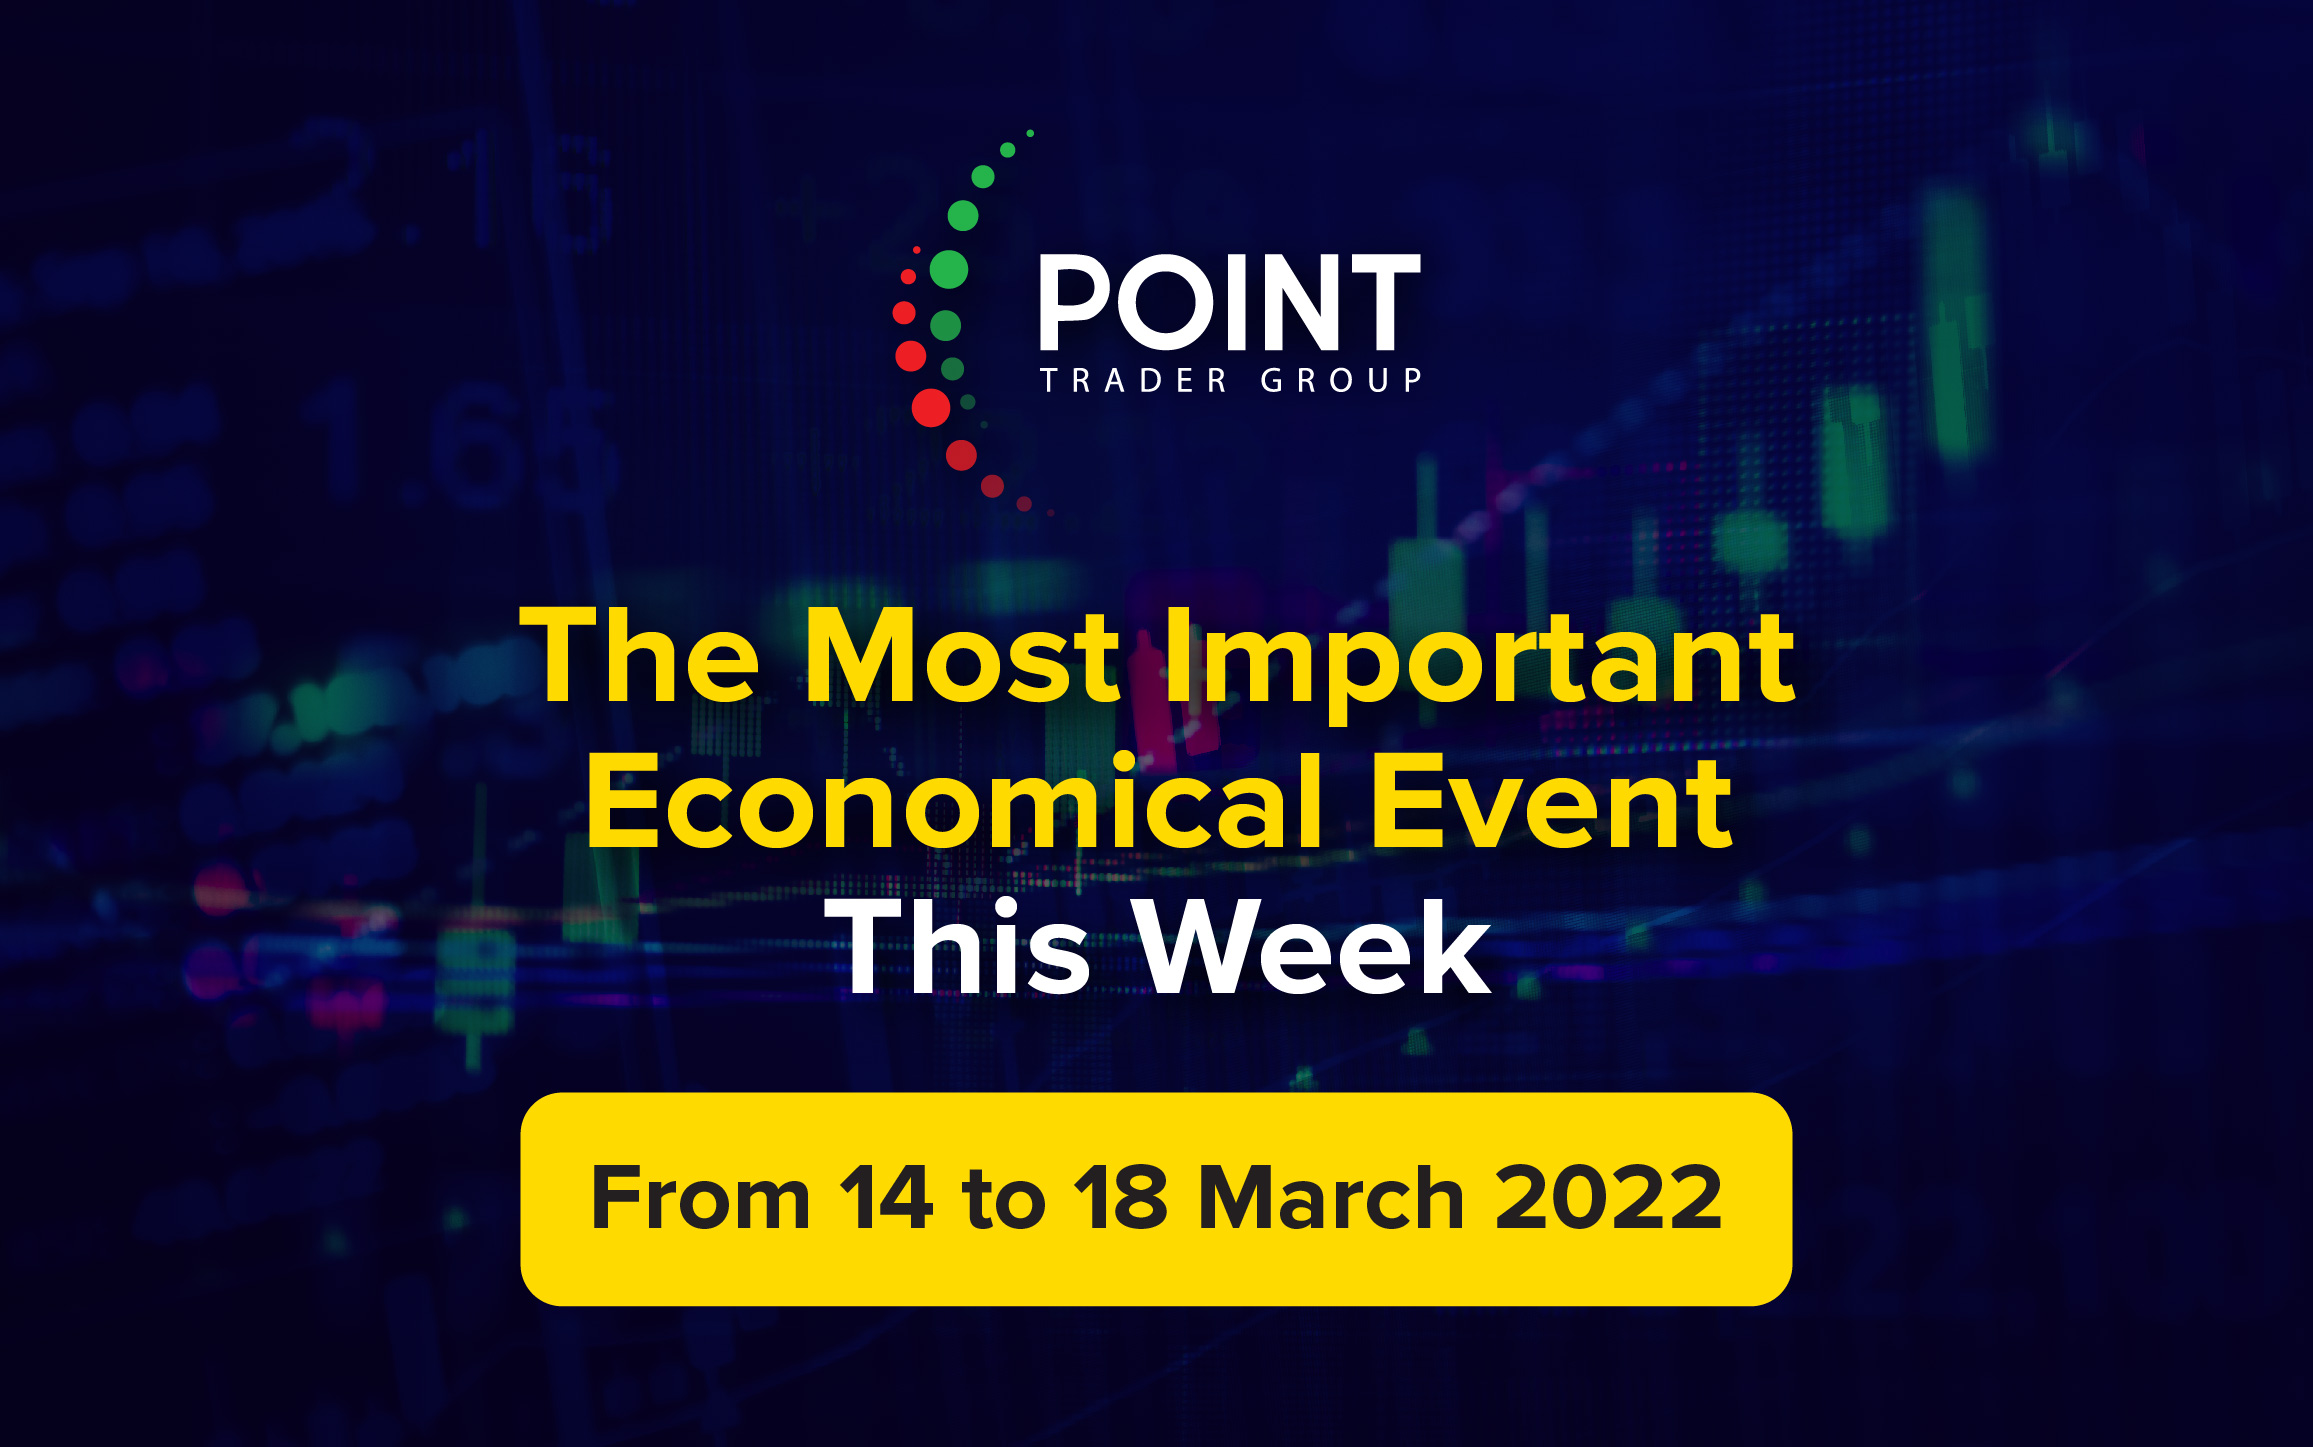 The most important Economic events this week from the 14th to the 18th of Mar 2022